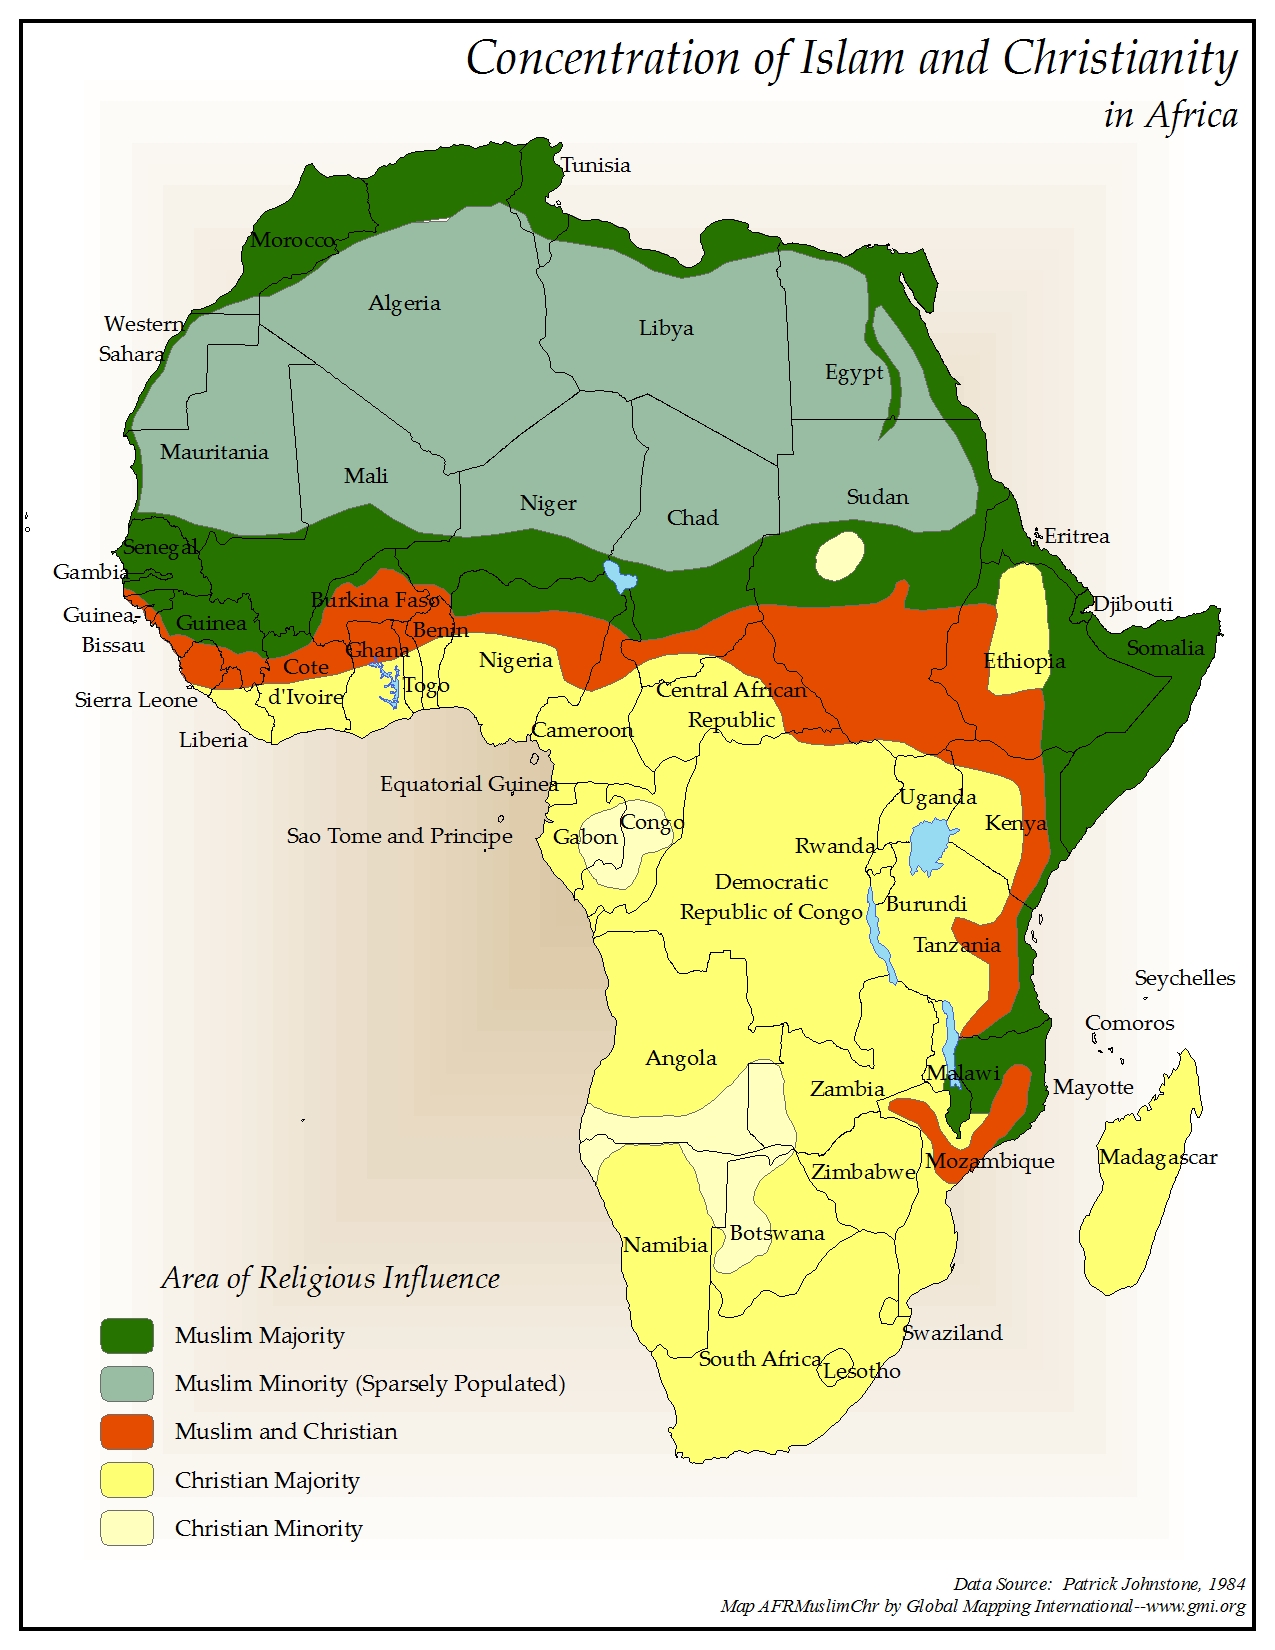 Concentration of Islam and Christianity in Africa